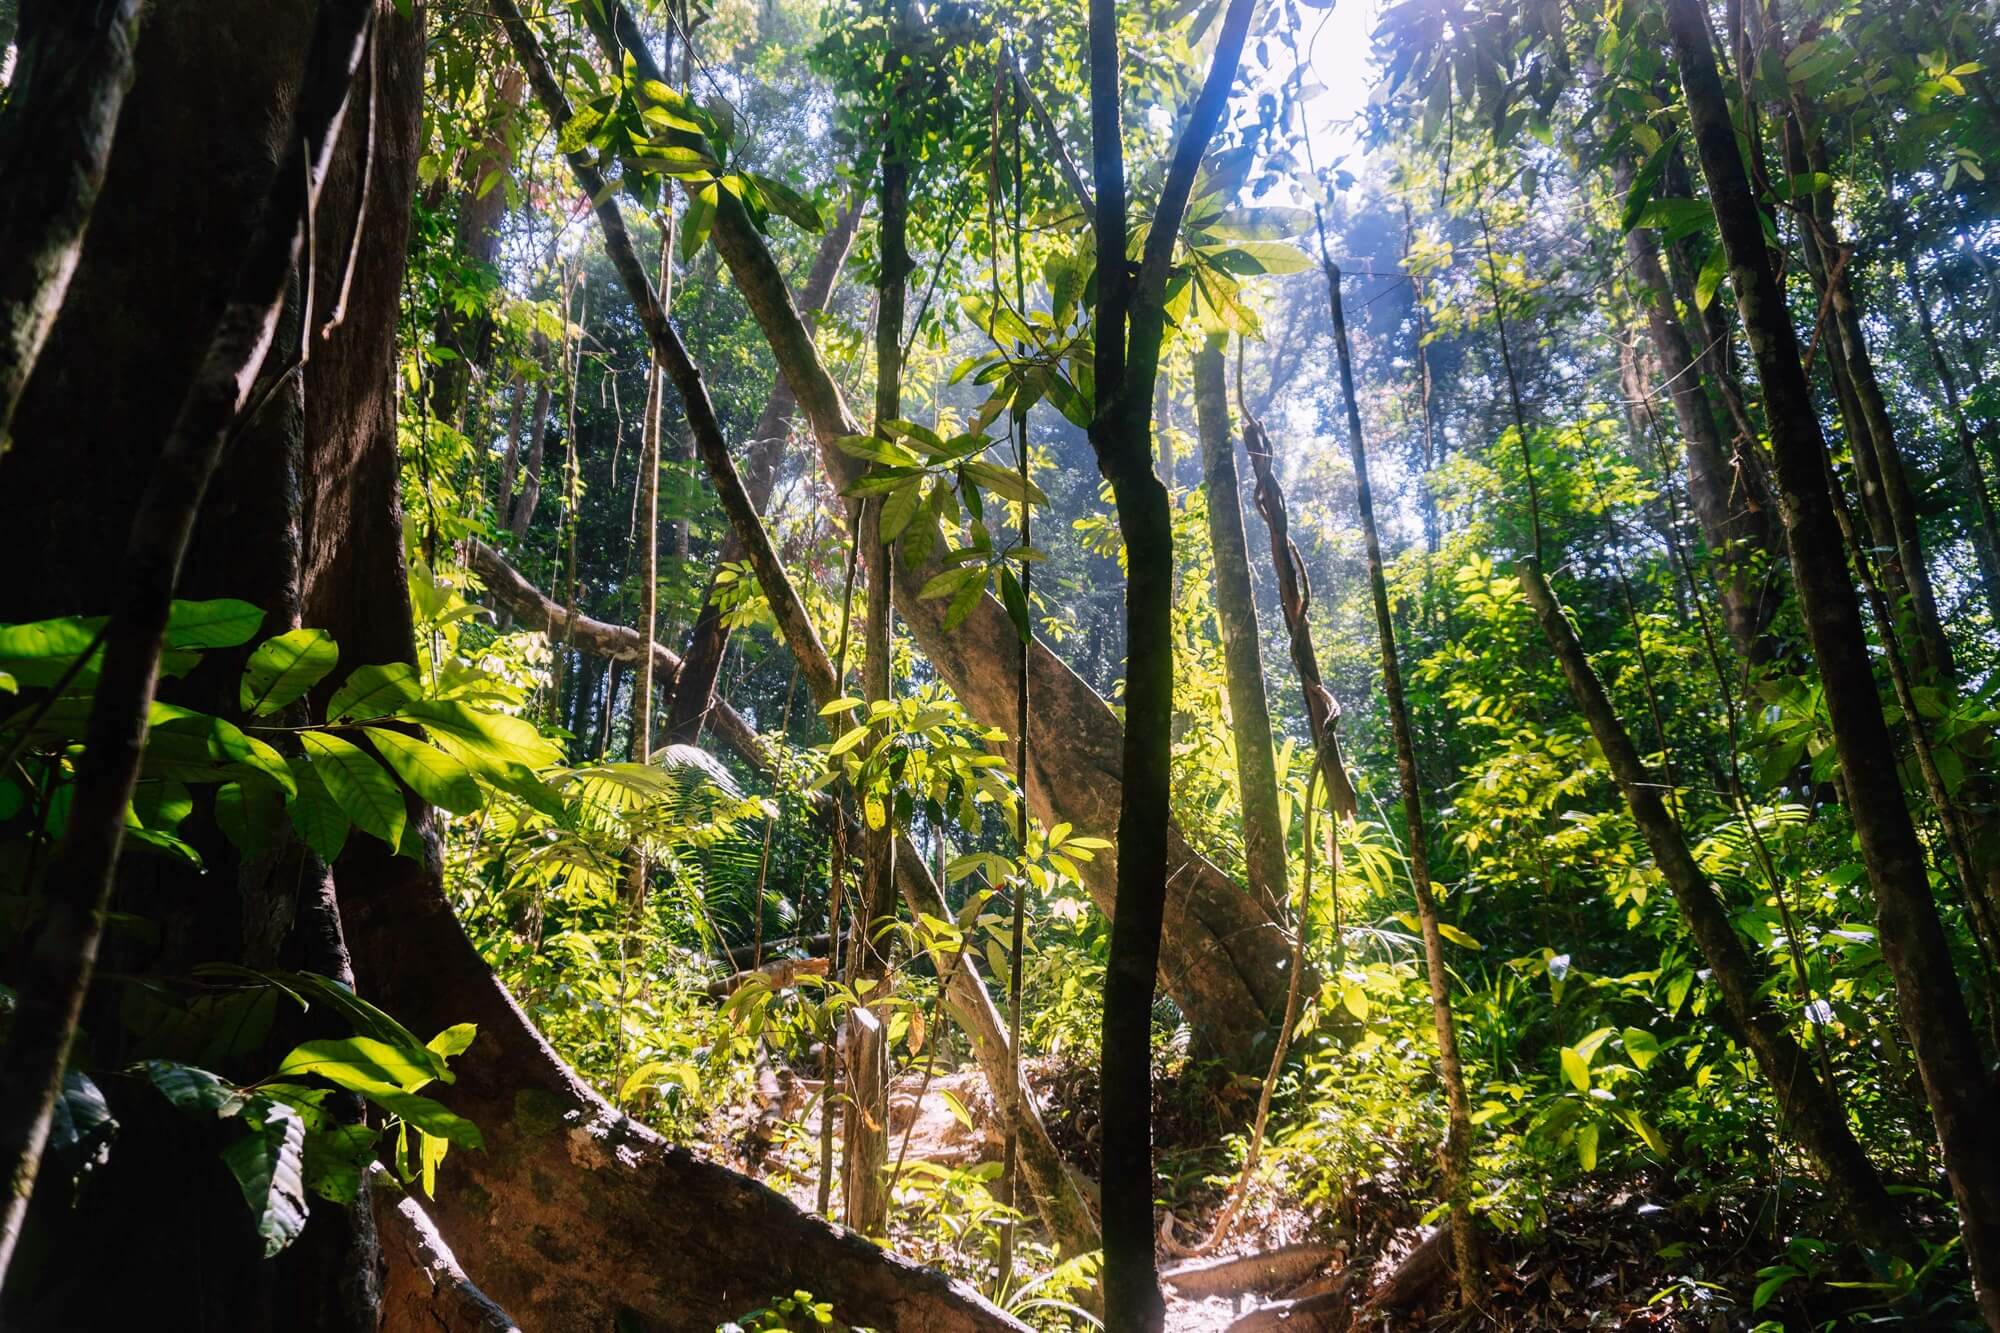 looking up through the trees from the ground of a krabi jungle to the light coming through the gaps